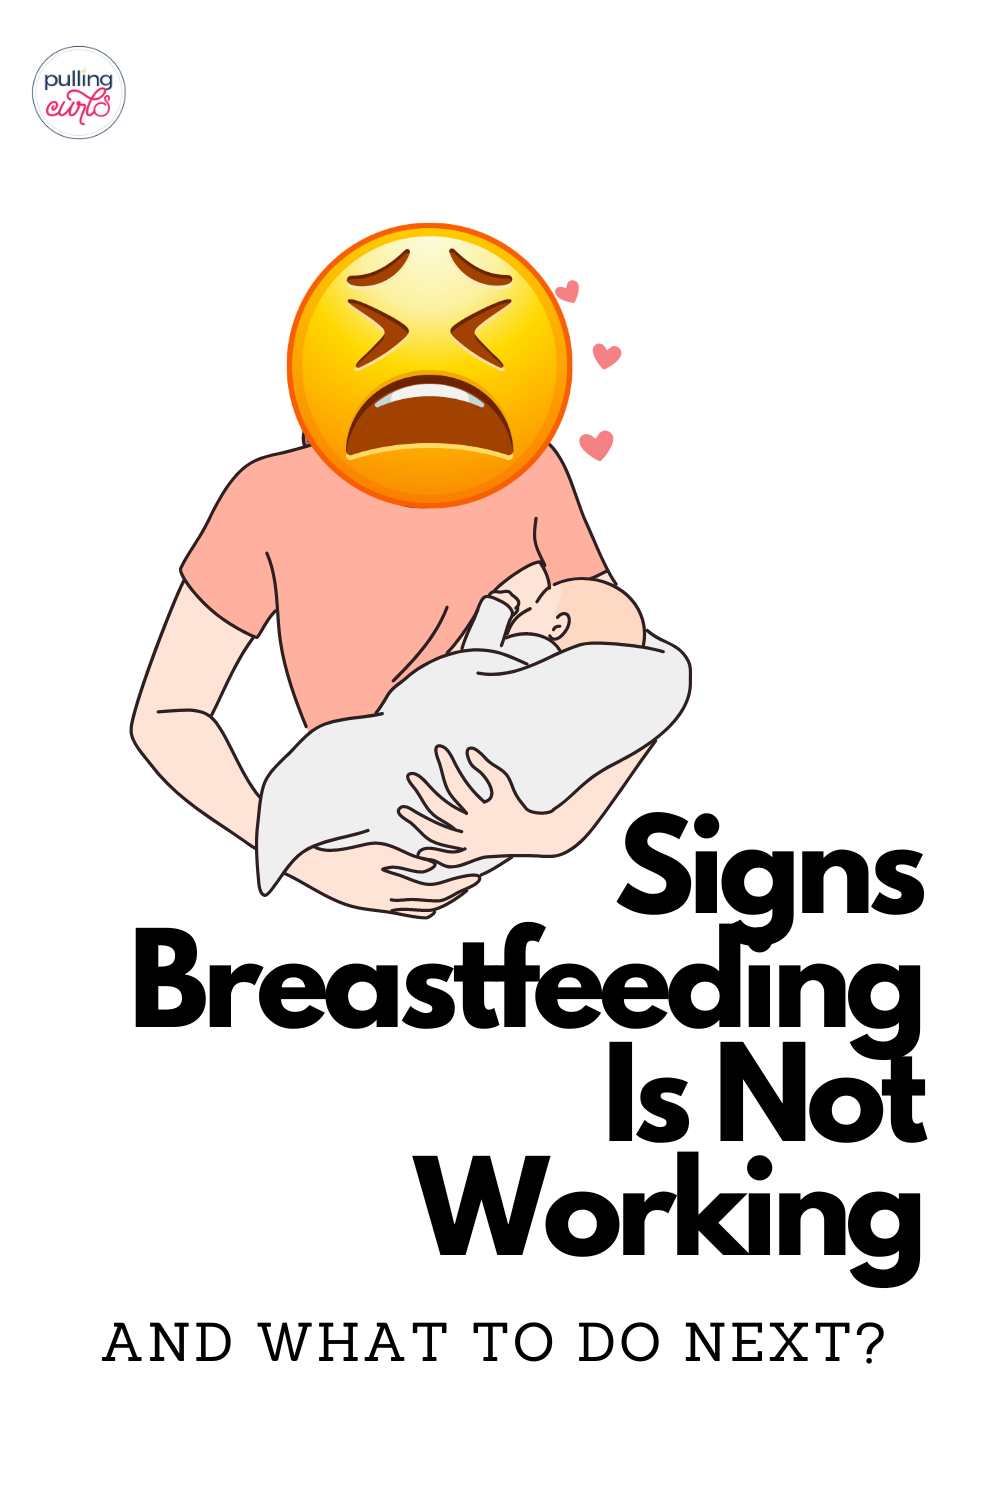 Struggling with breastfeeding? Don't let guilt consume you. This comprehensive guide helps you to recognize the signs that breastfeeding isn't working, and offers alternatives to ensure your baby's nutritional needs are met. via @pullingcurls